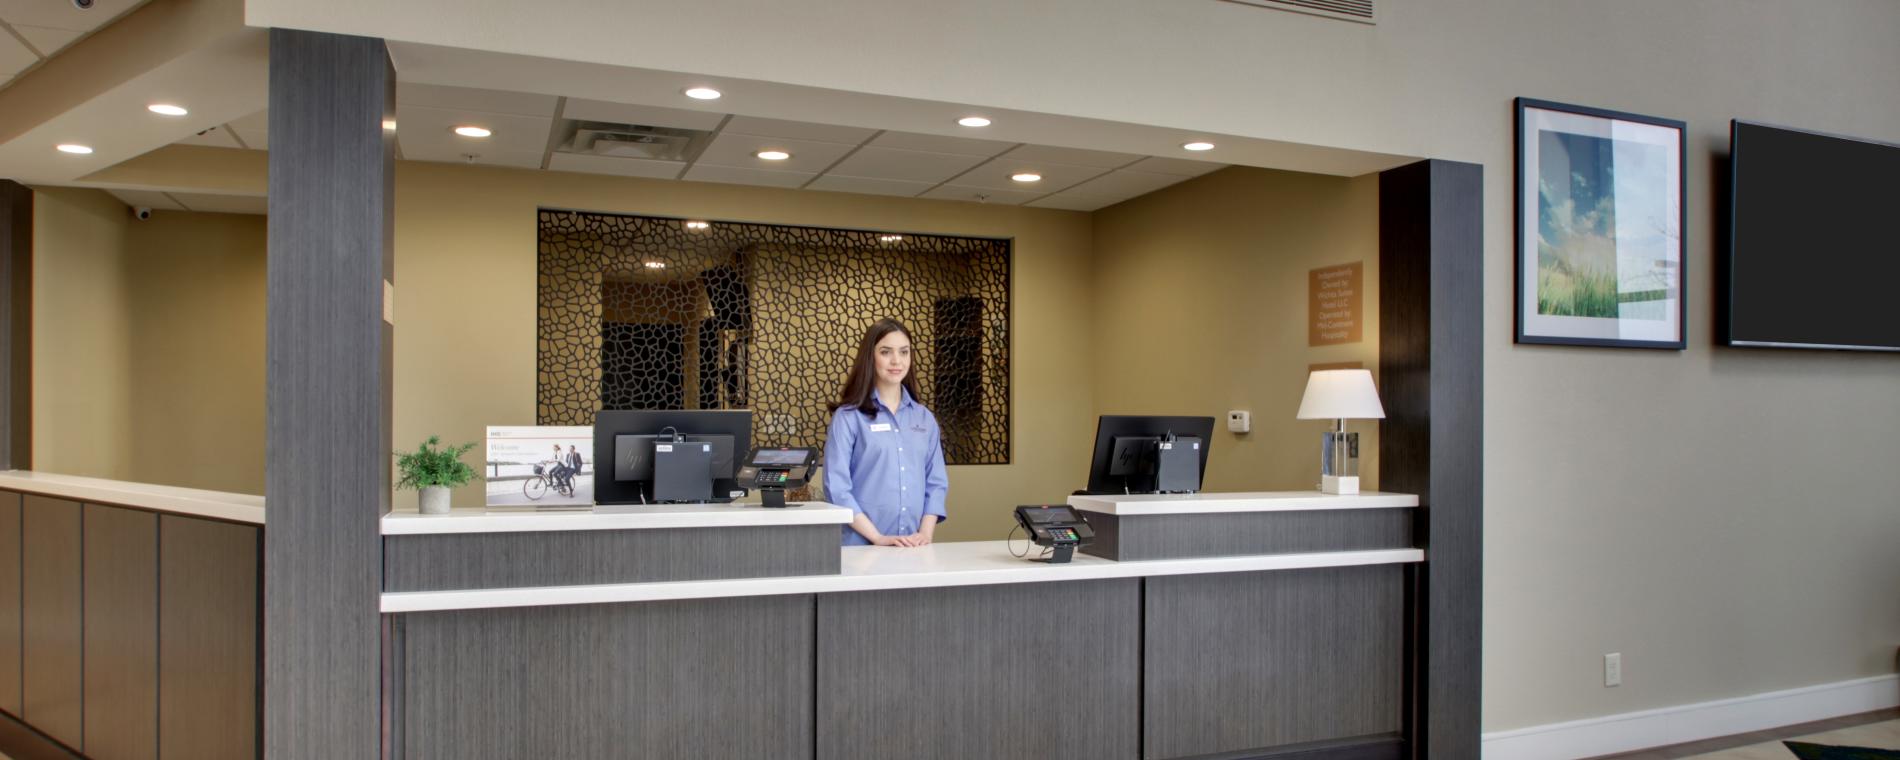 Canclewood E front desk Visit Wichita